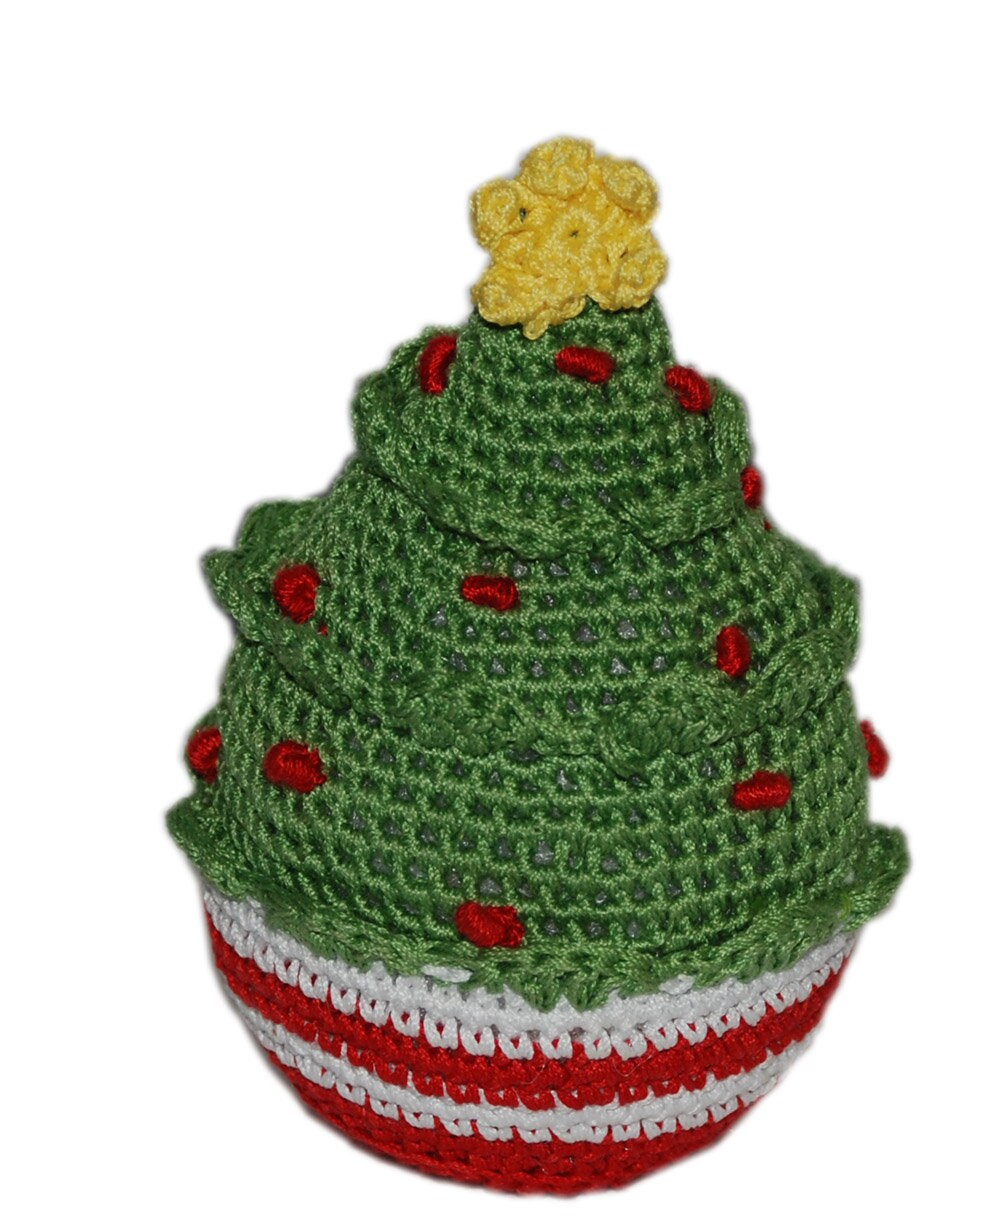 Knit Knacks Organic Cotton Pet& Dog Toys, "Christmas Group" (Choose from: Rudy Reindeer, Christmas Tree, Ornament, Snowman, Gingerbread Man)-4